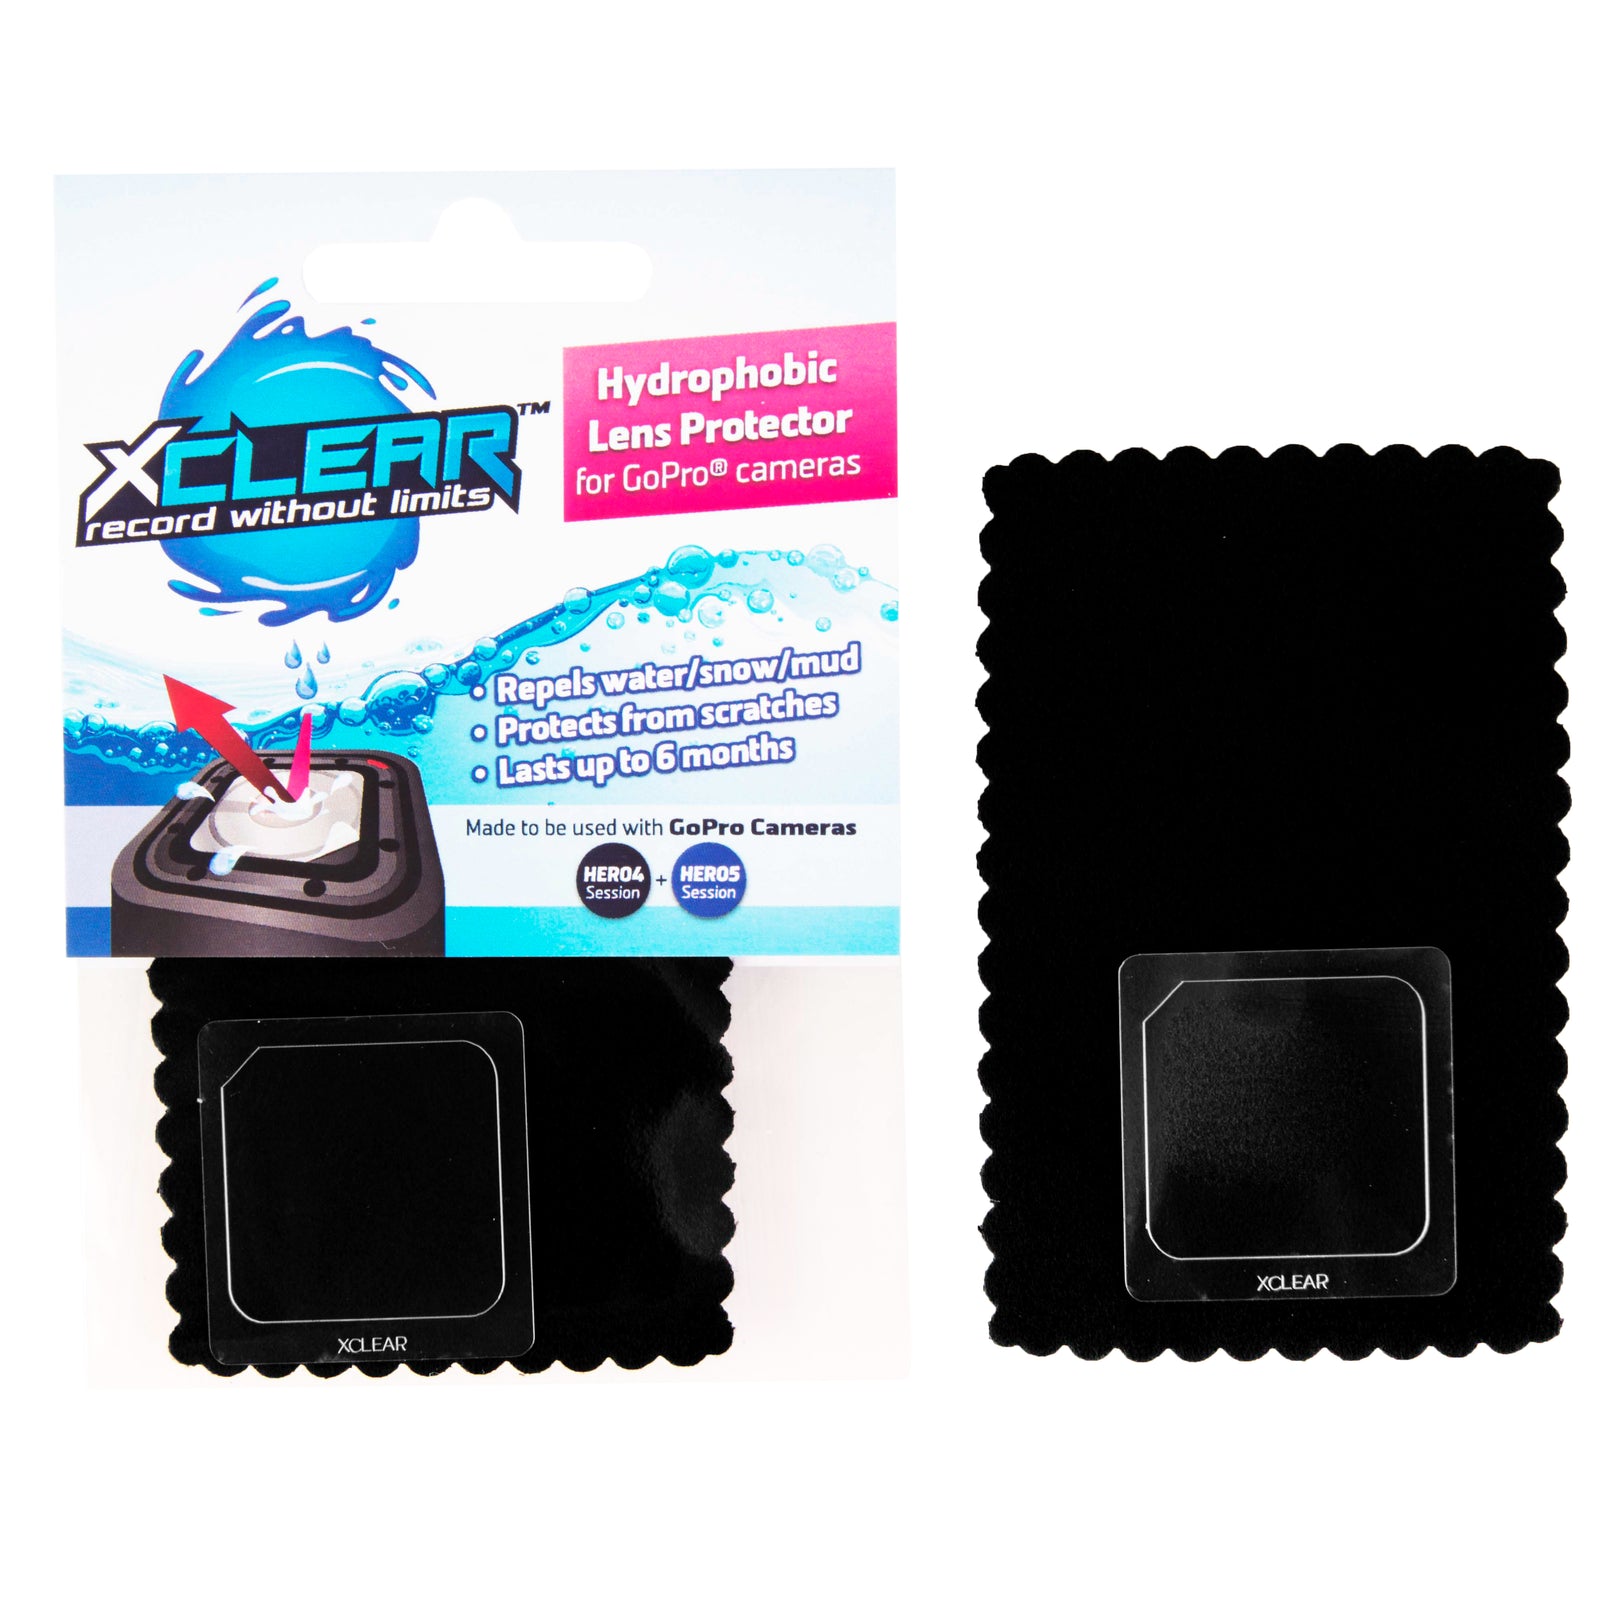 XCLEAR hydrophobic protectors for GoPro, keep water drops off footage  Tagged surf - XCLEAR - Leaders in Hydrophobic Products for GoPro.